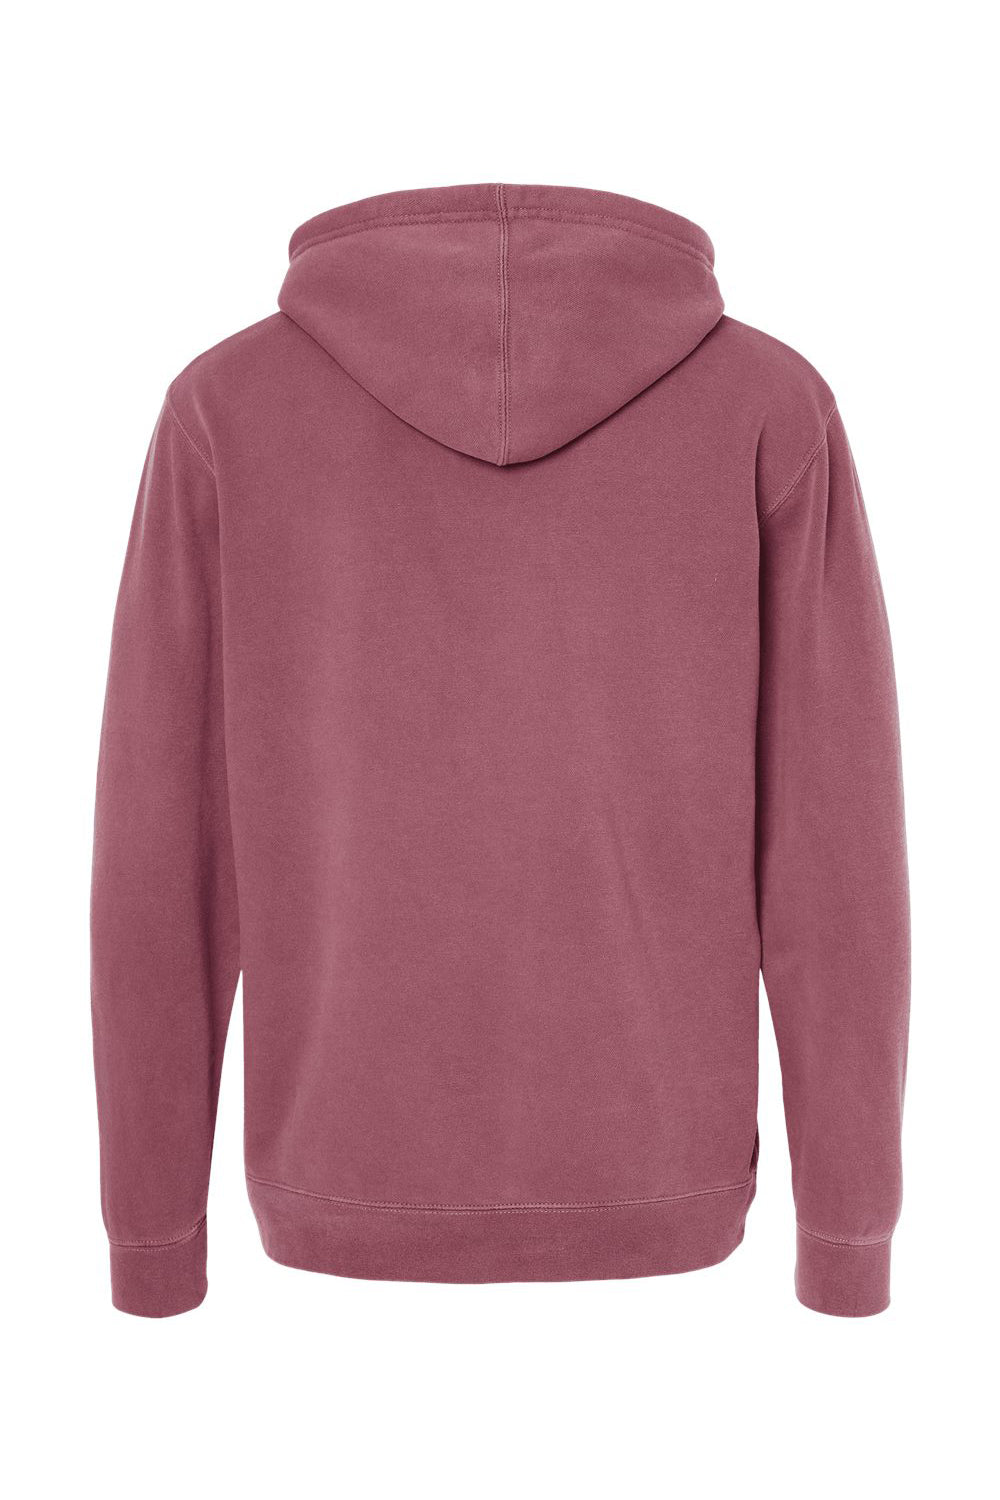 Independent Trading Co. PRM4500 Mens Pigment Dyed Hooded Sweatshirt Hoodie Maroon Flat Back